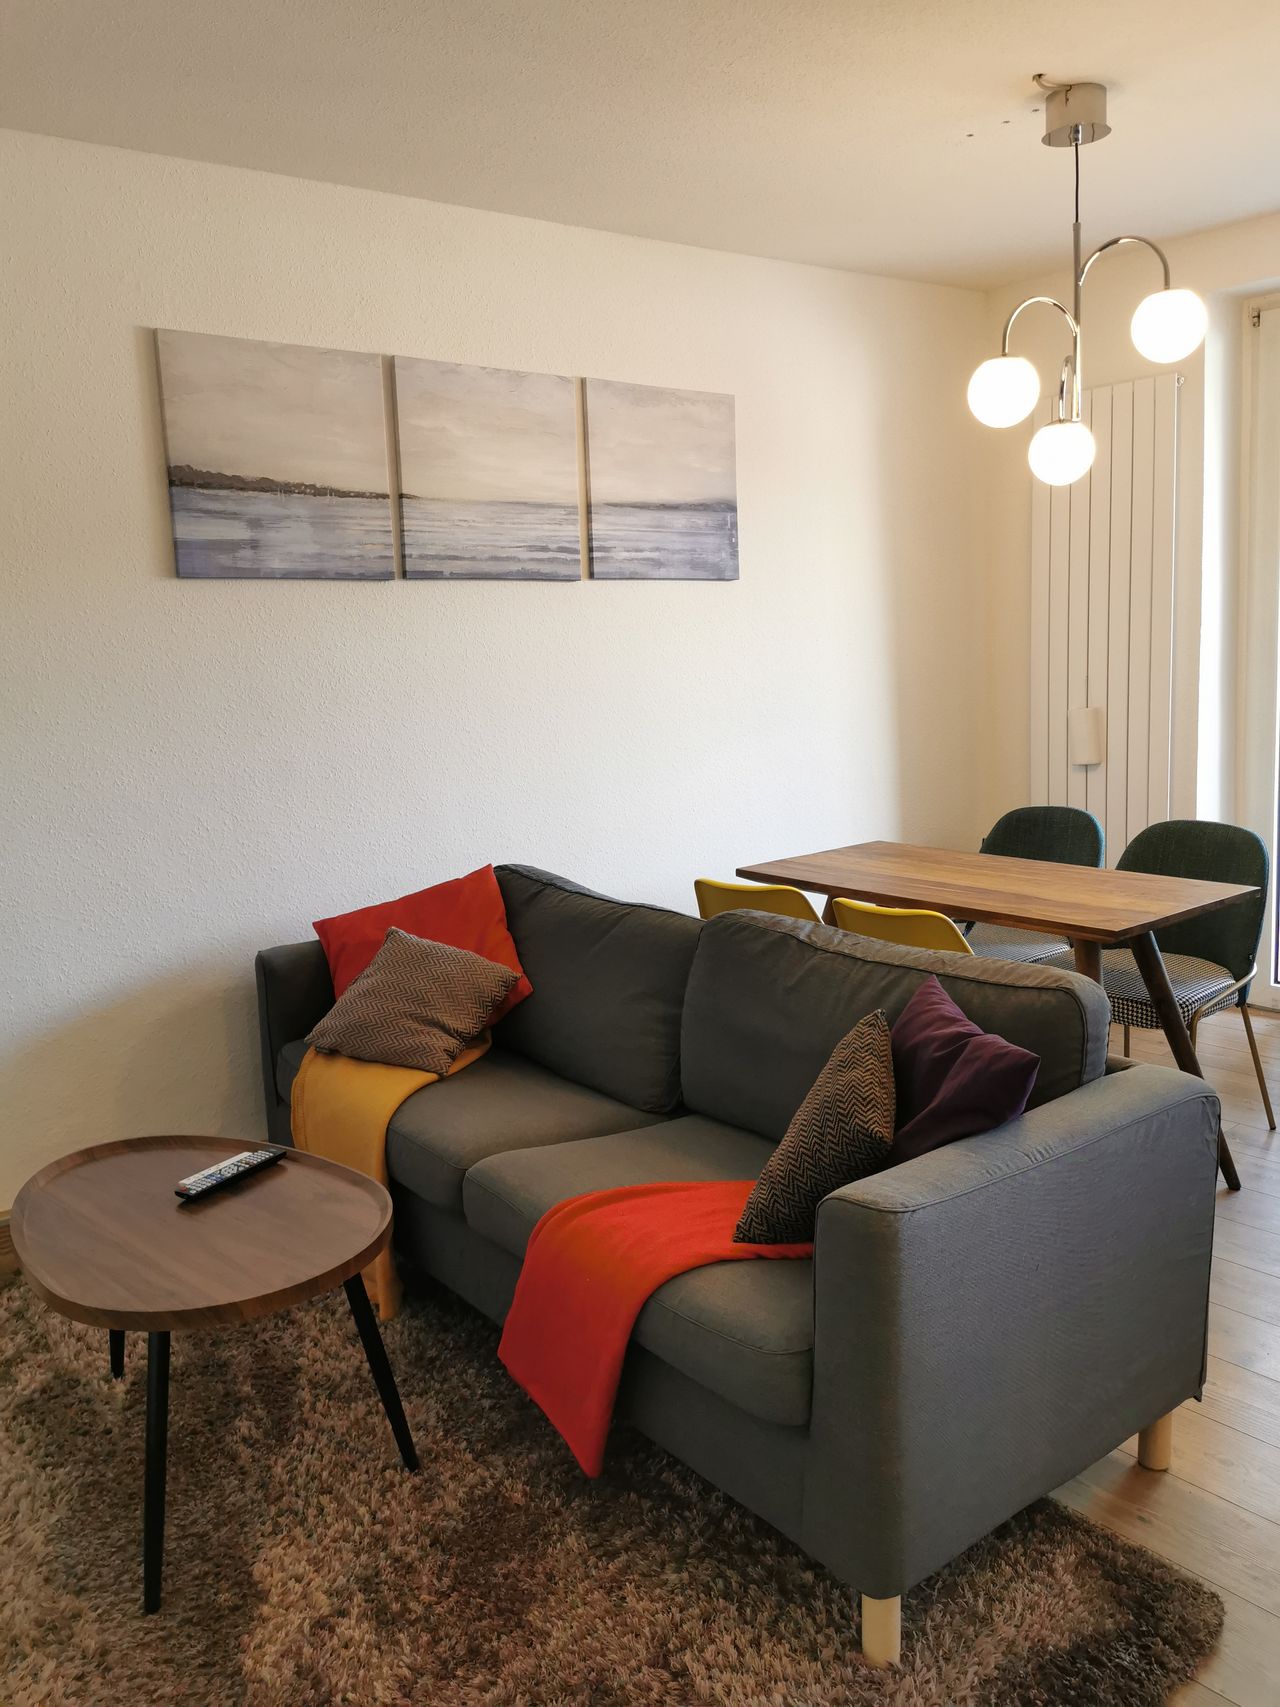 4-room newly and fully furnished apartment near Central Station with large balcony, 90-square meter in Wuppertal City Center